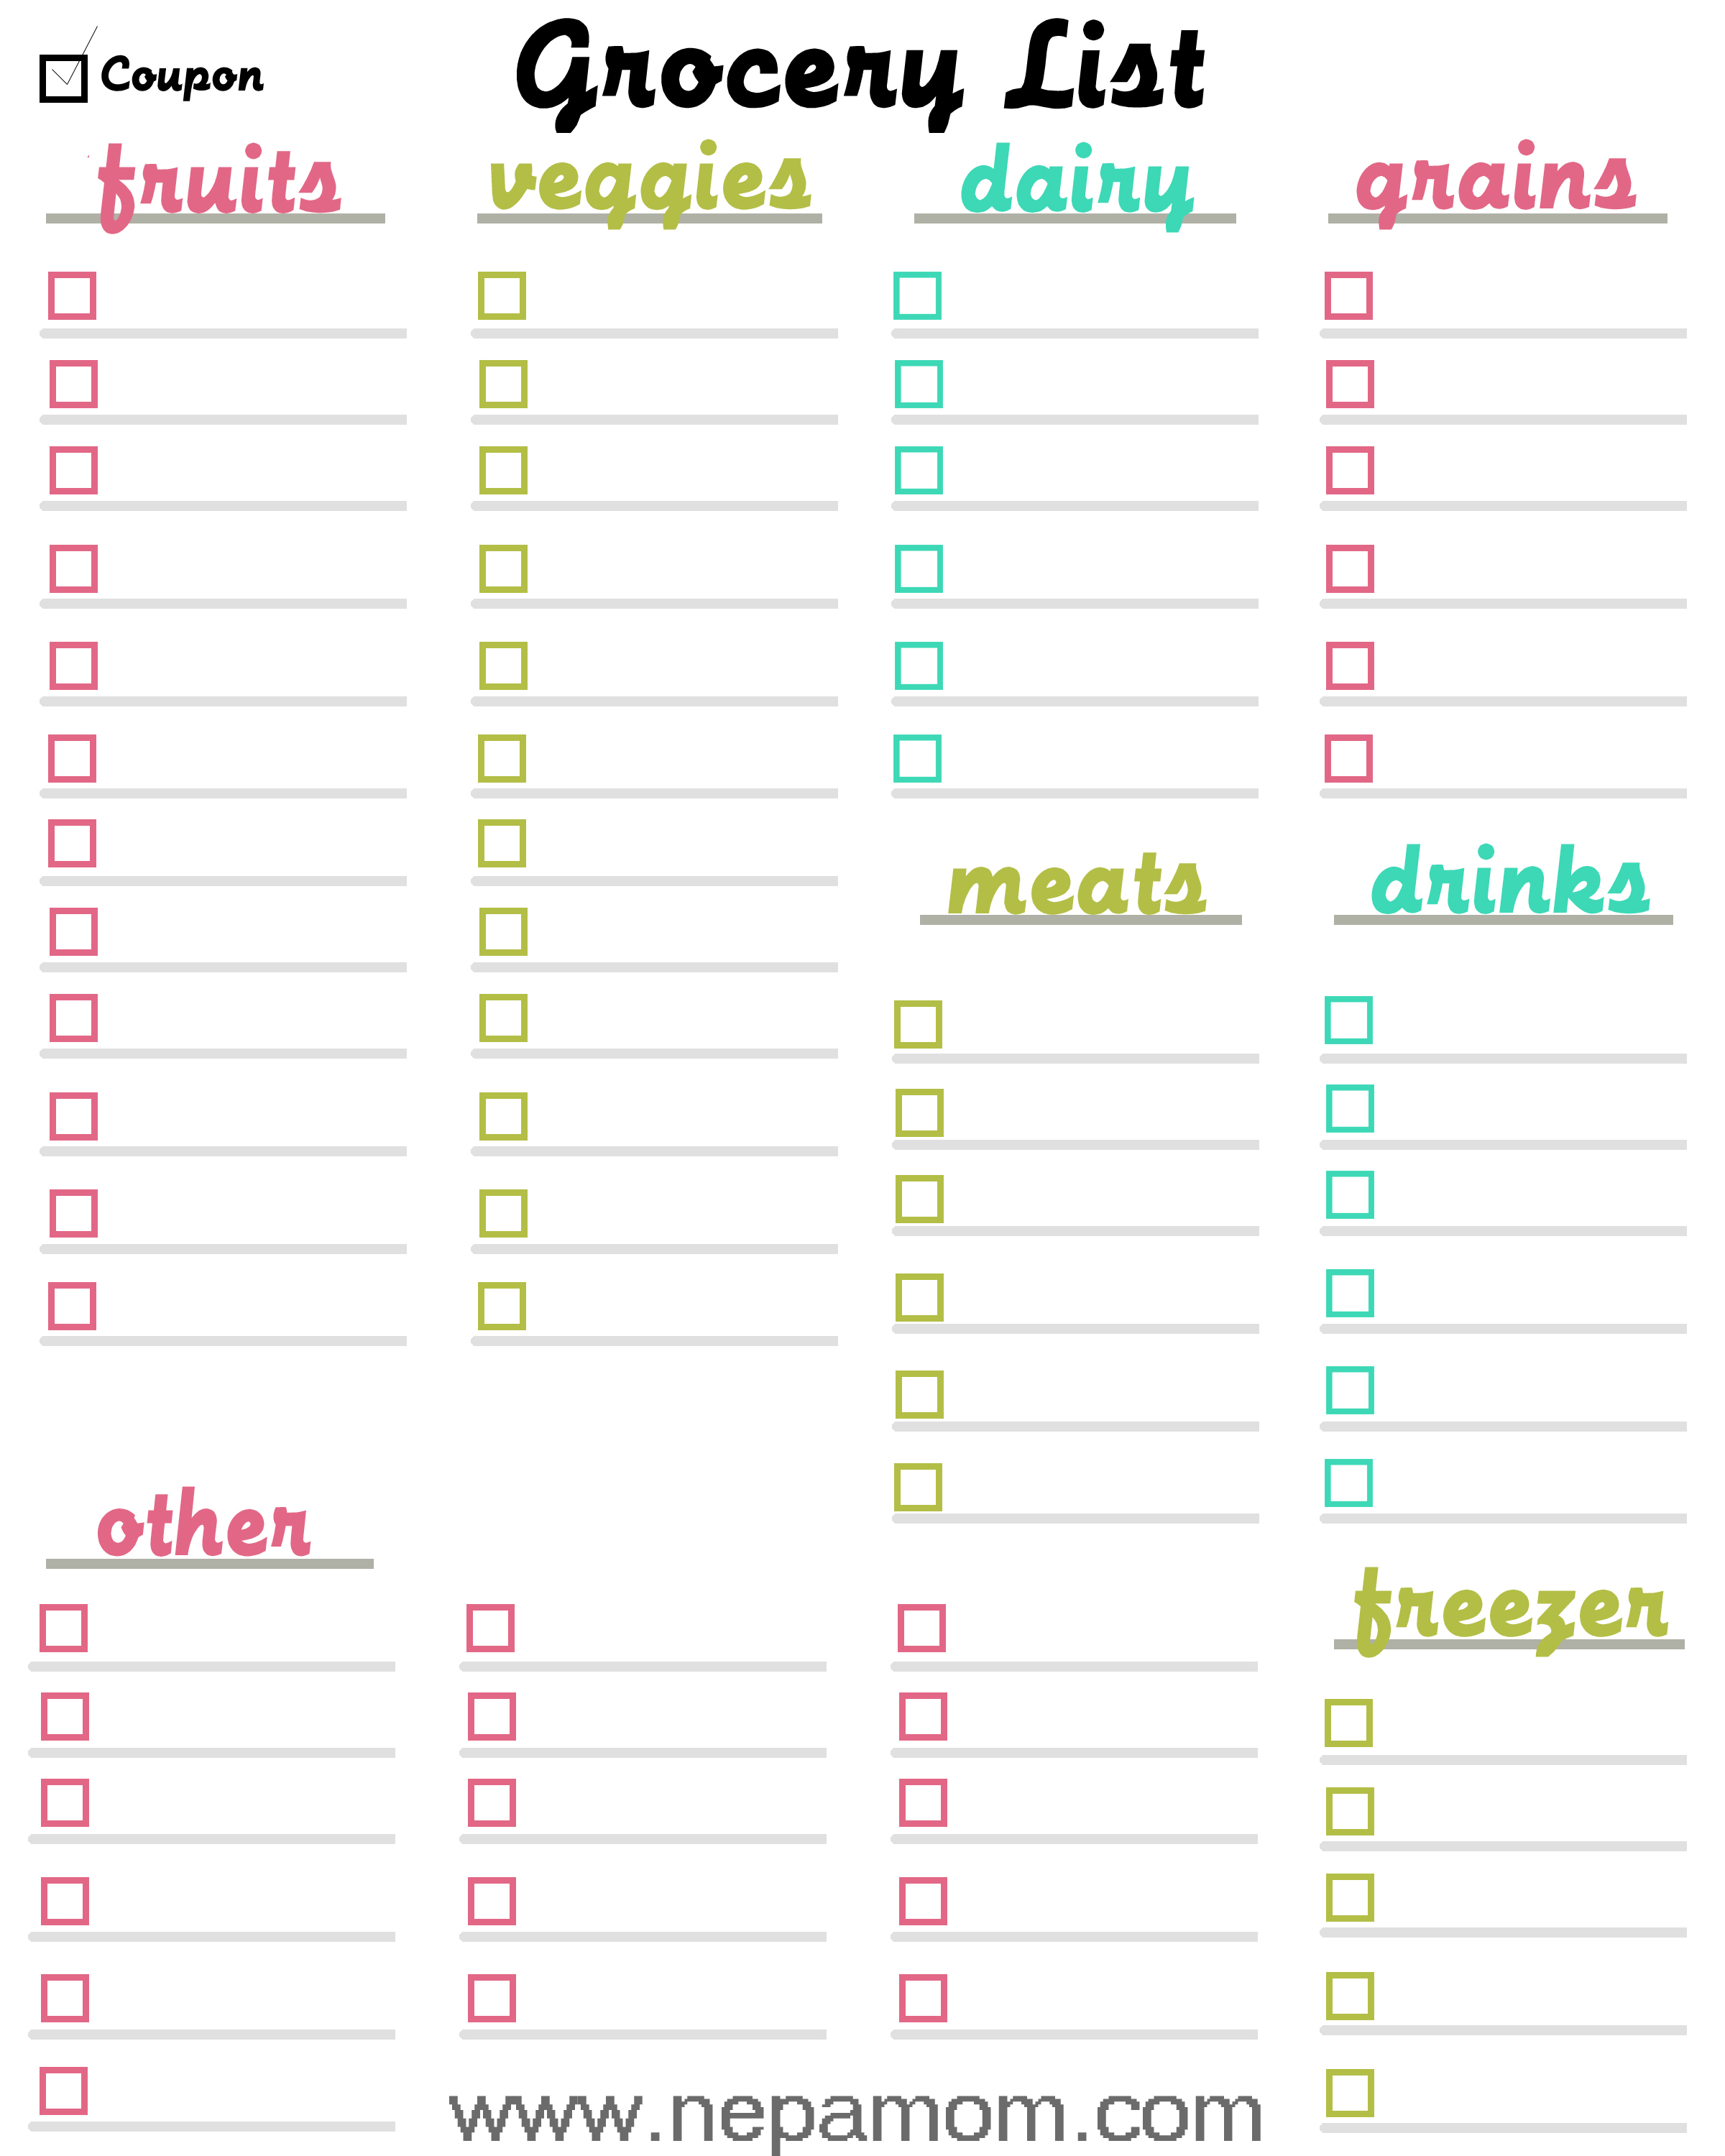 Grocery Shopping List Template print This Template Out And Save Money 